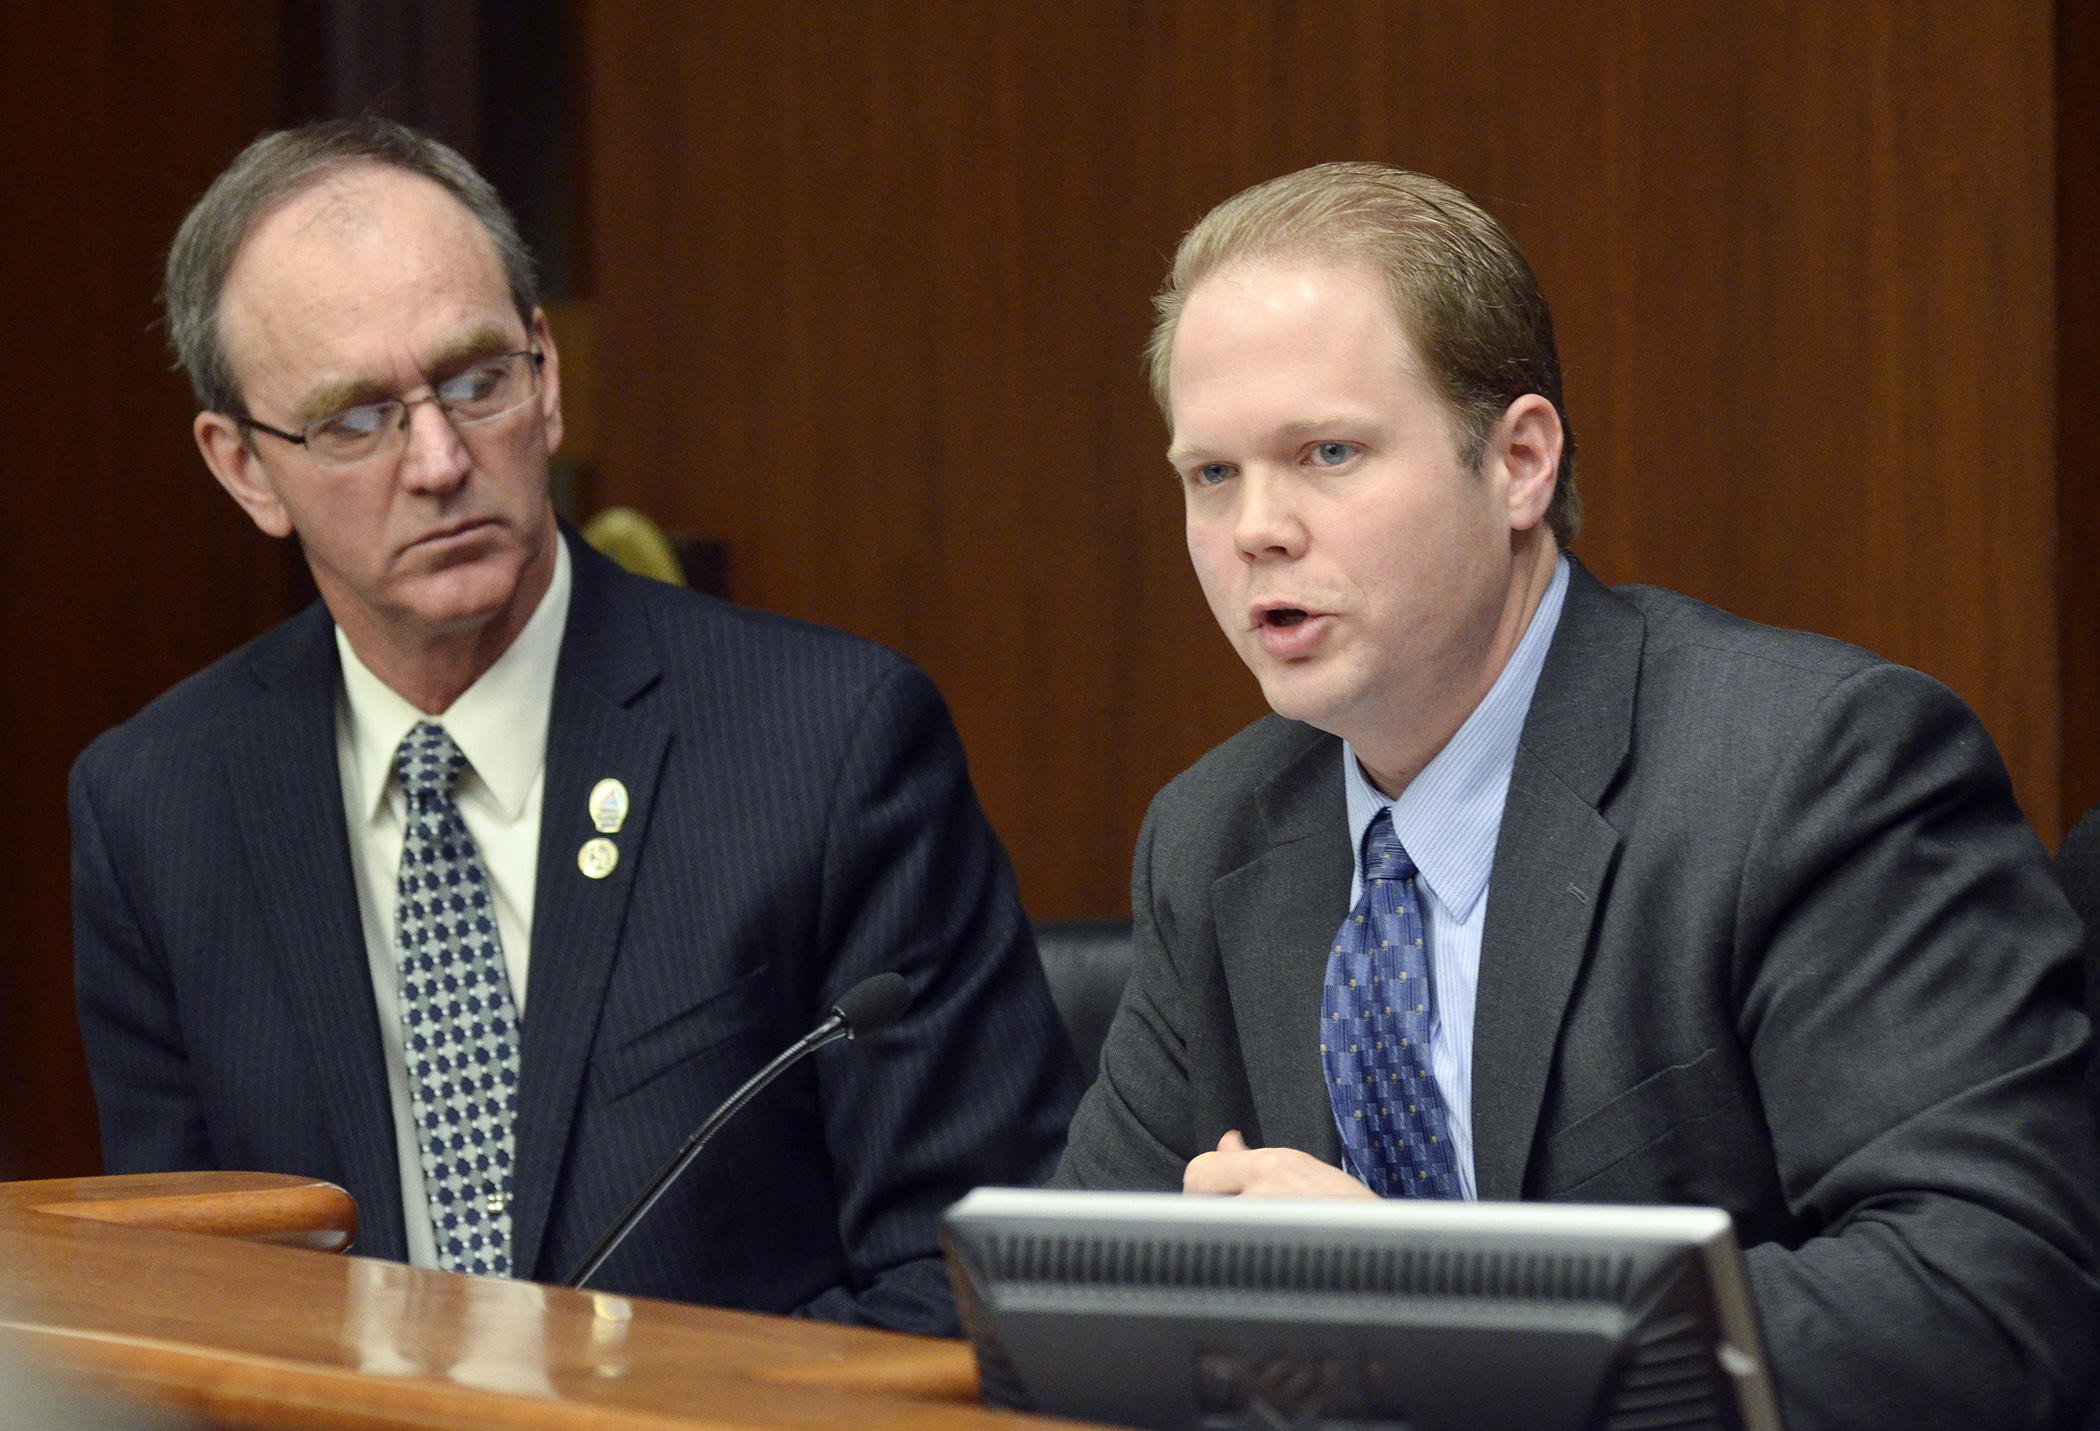 Speaking on behalf of the Minnesota Environmental Science and Economic Review Board, Steve Nyhus, right, testifies Feb. 26 for a bill sponsored by Rep. Dan Fabian, left, that would require water quality work independent peer review.  Photo by Andrew VonBank